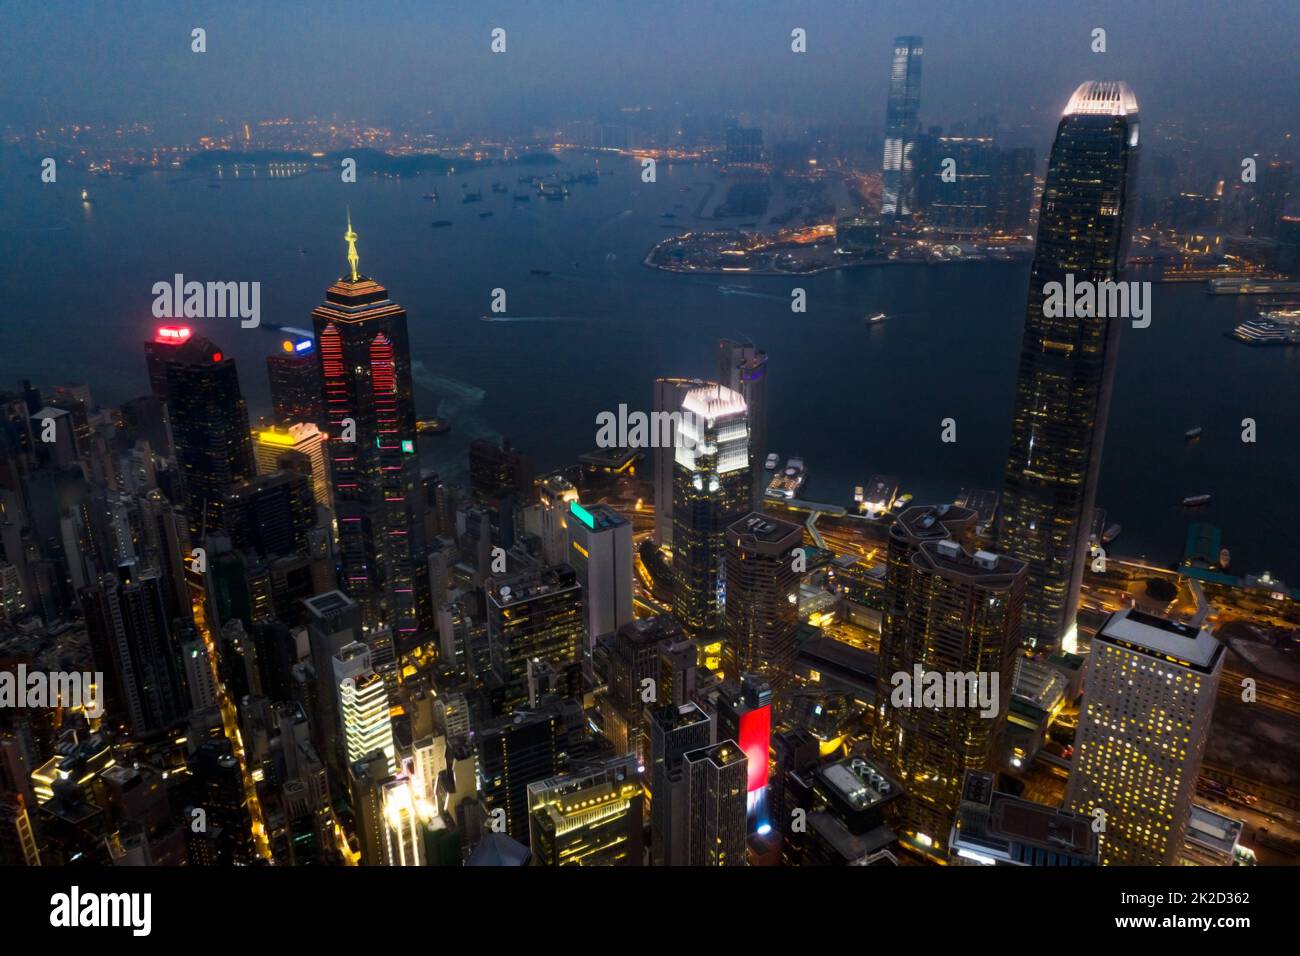 This city glows at night. Aerial shot of skyscrapers, office blocks and other commercial buildings in the urban metropolis of Hong Kong. Stock Photo